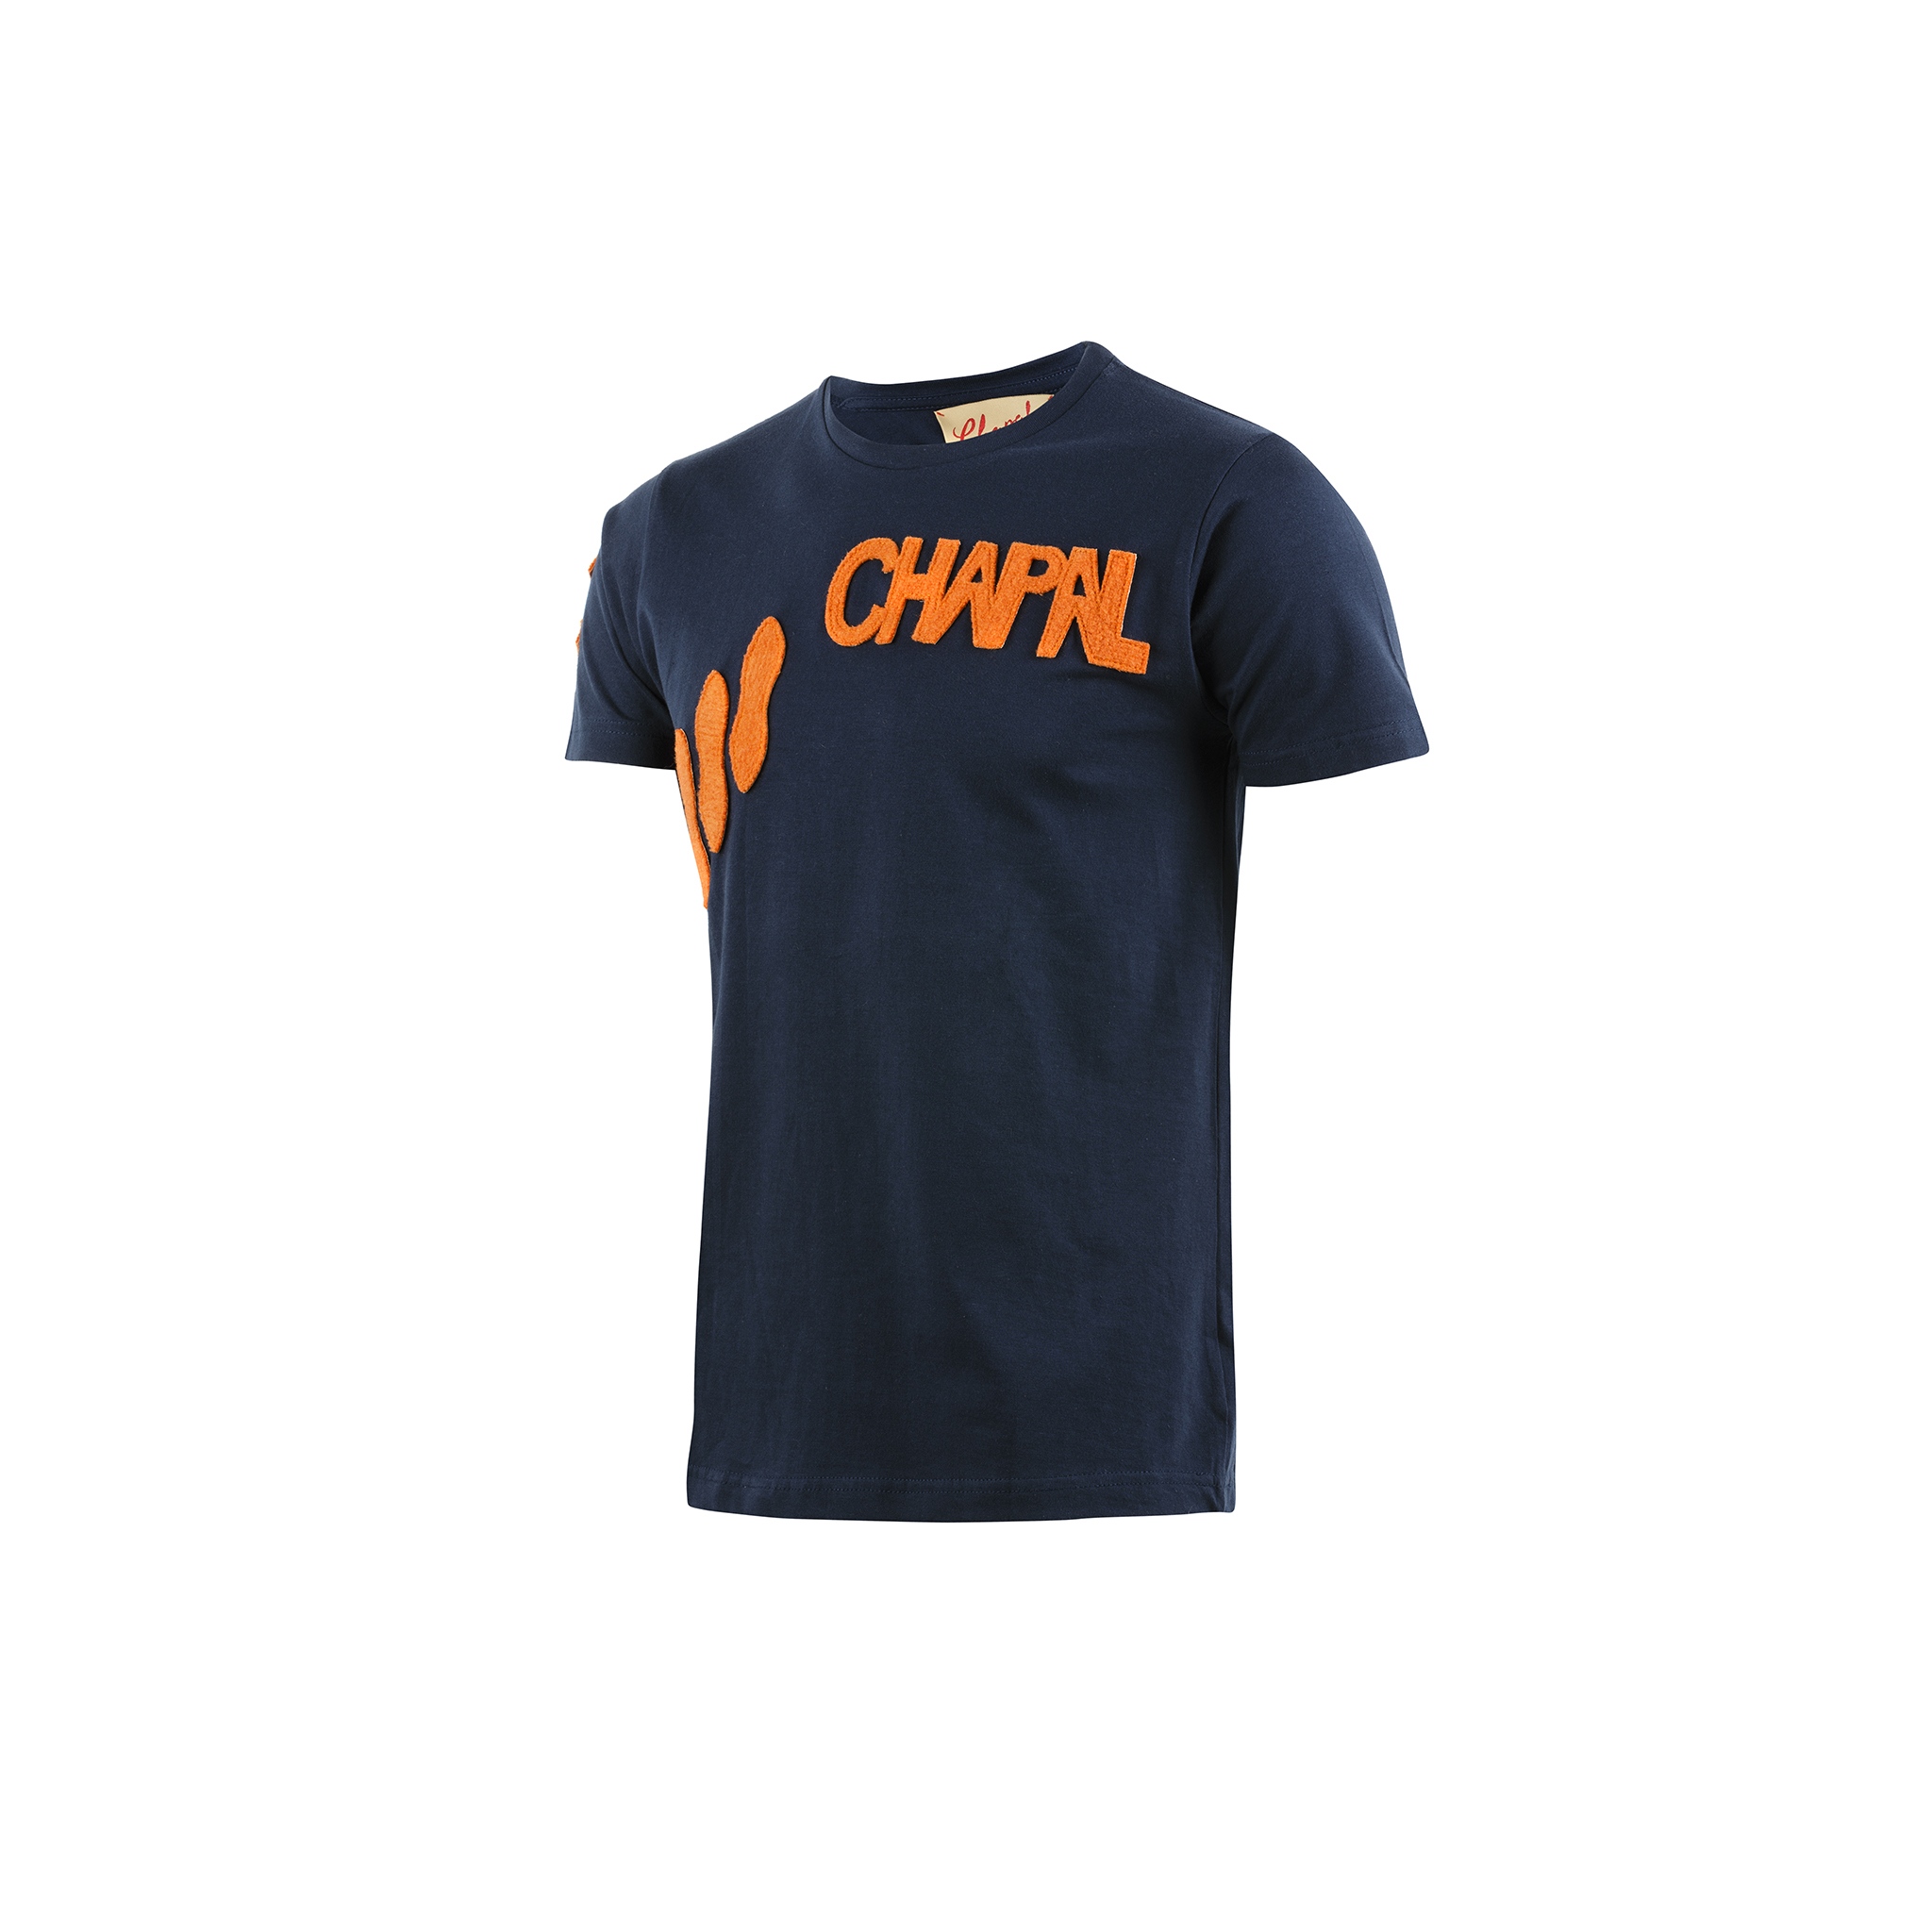 T-shirt Apostrophe - Cotton jersey and wool - Blue and orange colors